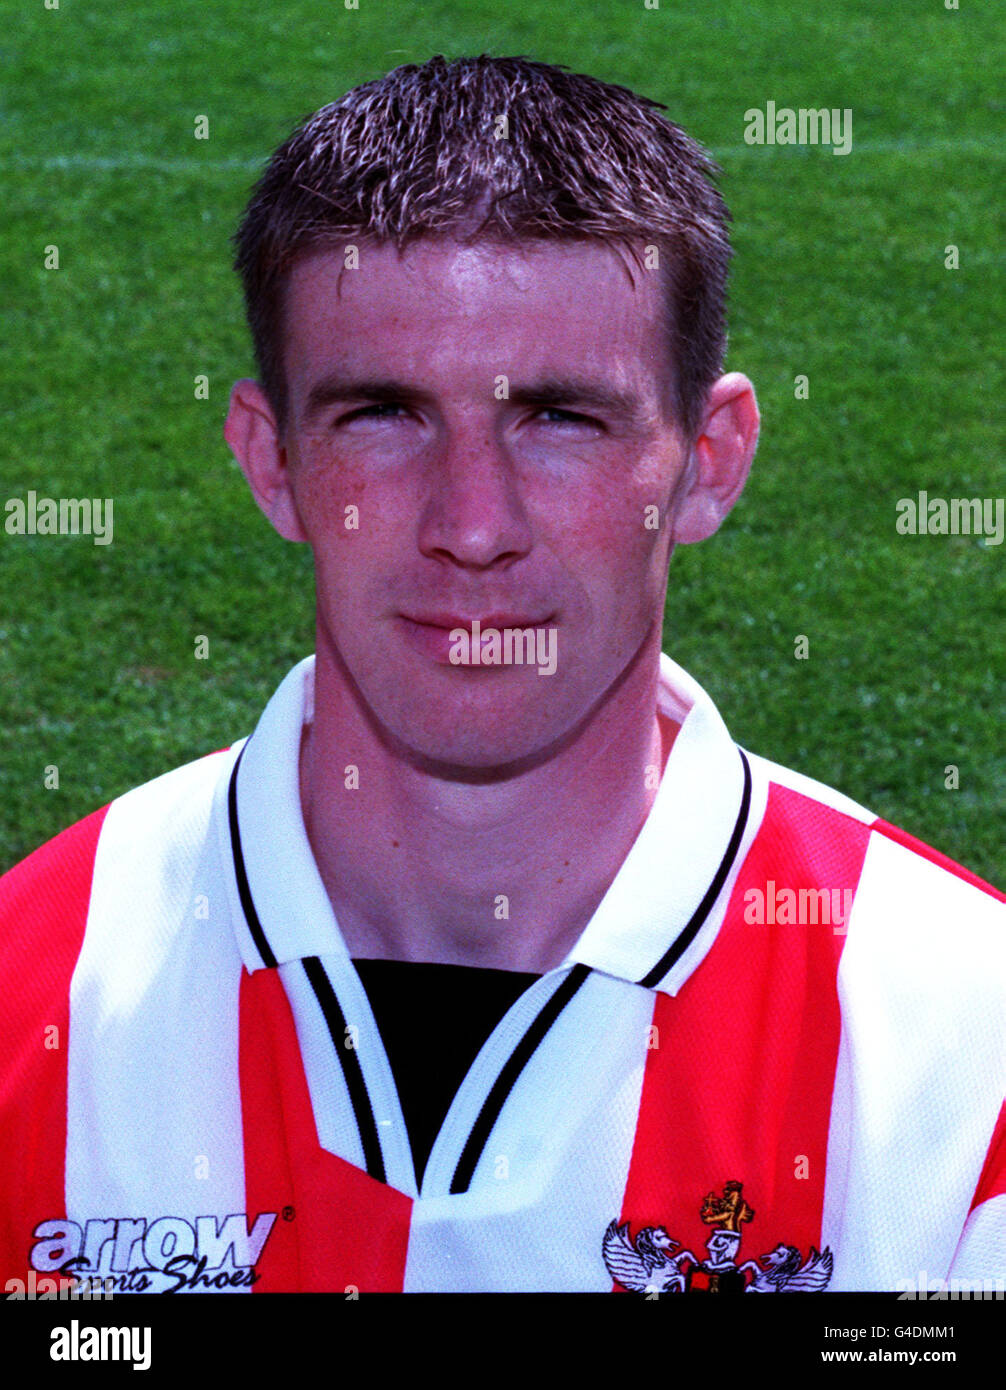 EXETER CITY FC. SHAUN GAYLE OF EXETER CITY FOOTBALL CLUB. Stock Photo